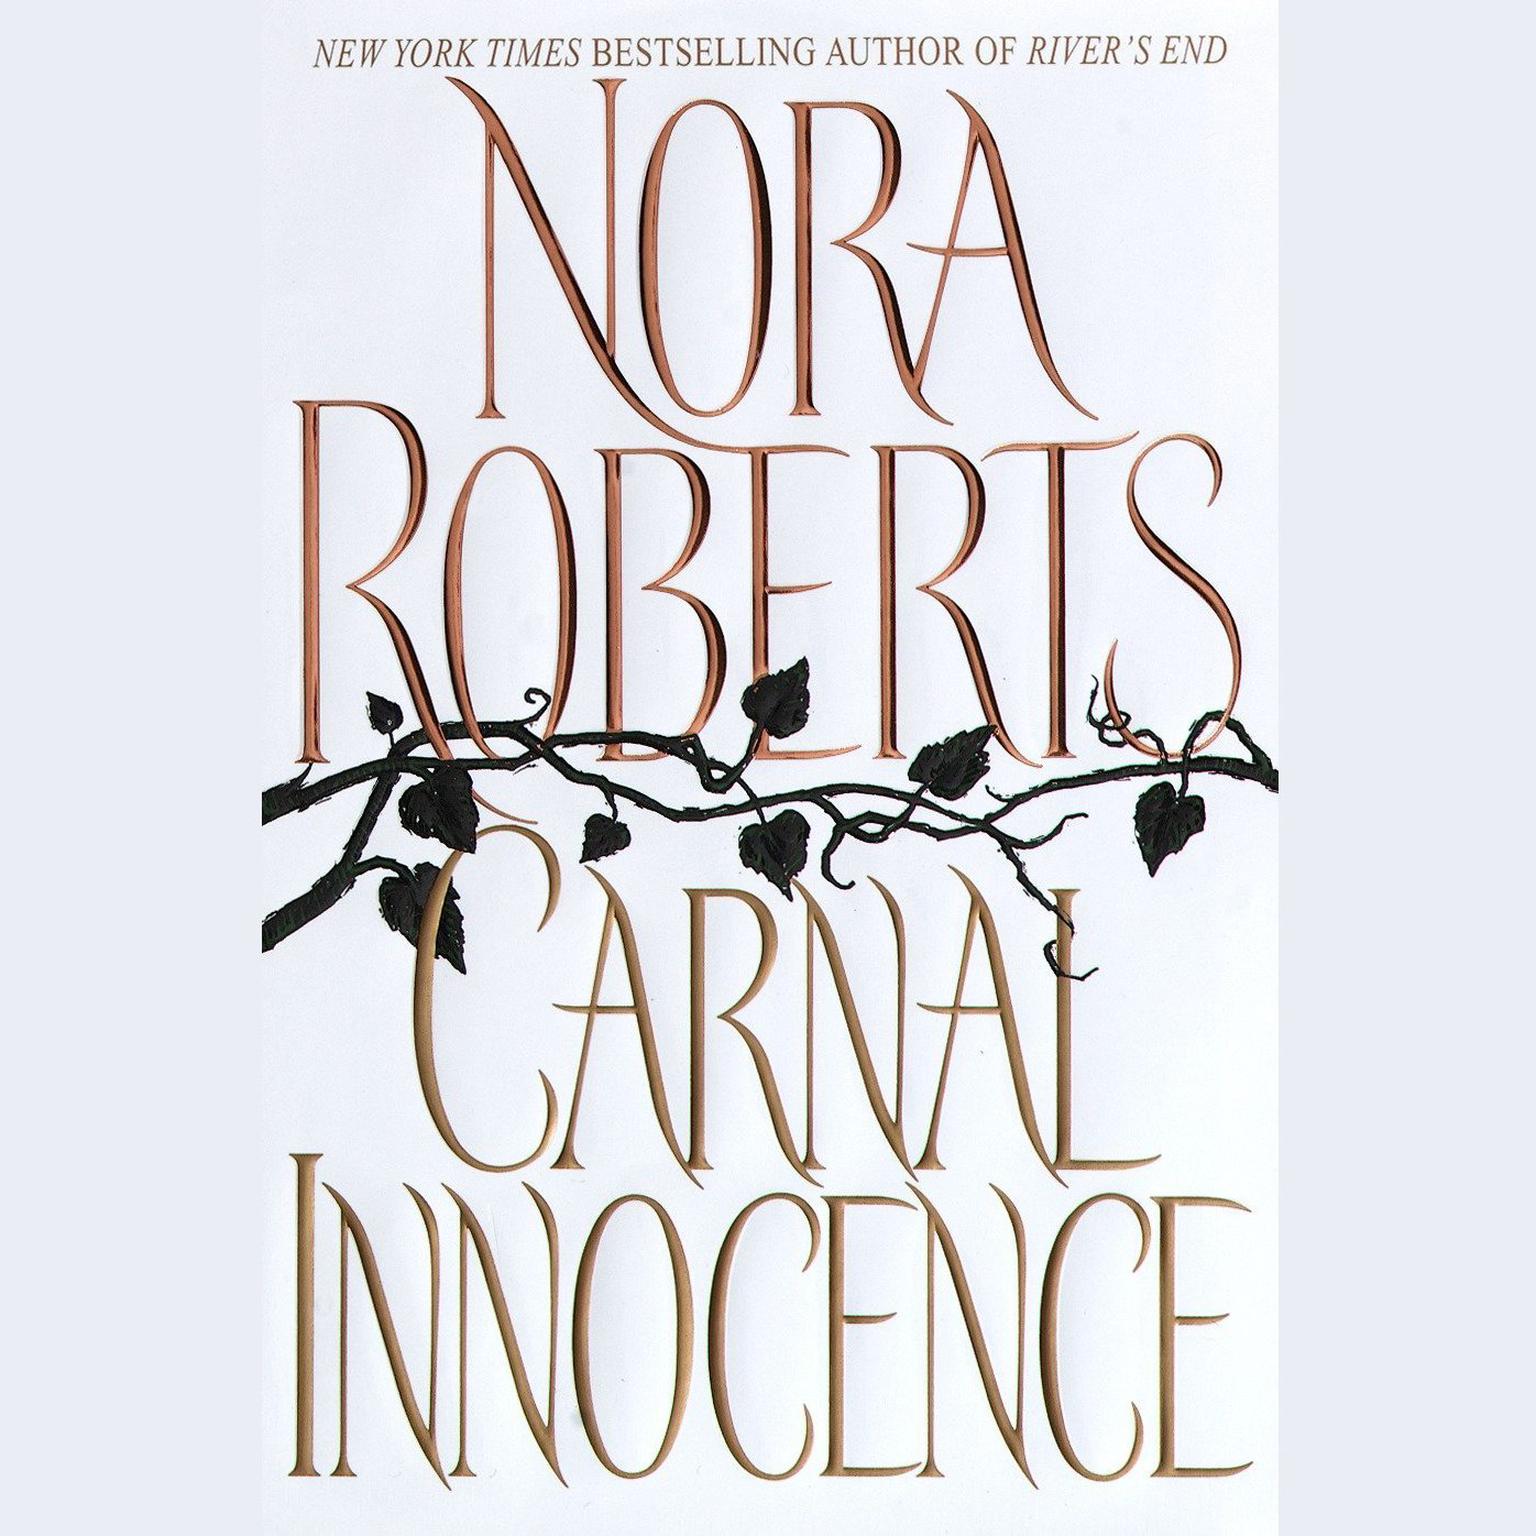 Carnal Innocence (Abridged) Audiobook, by Nora Roberts